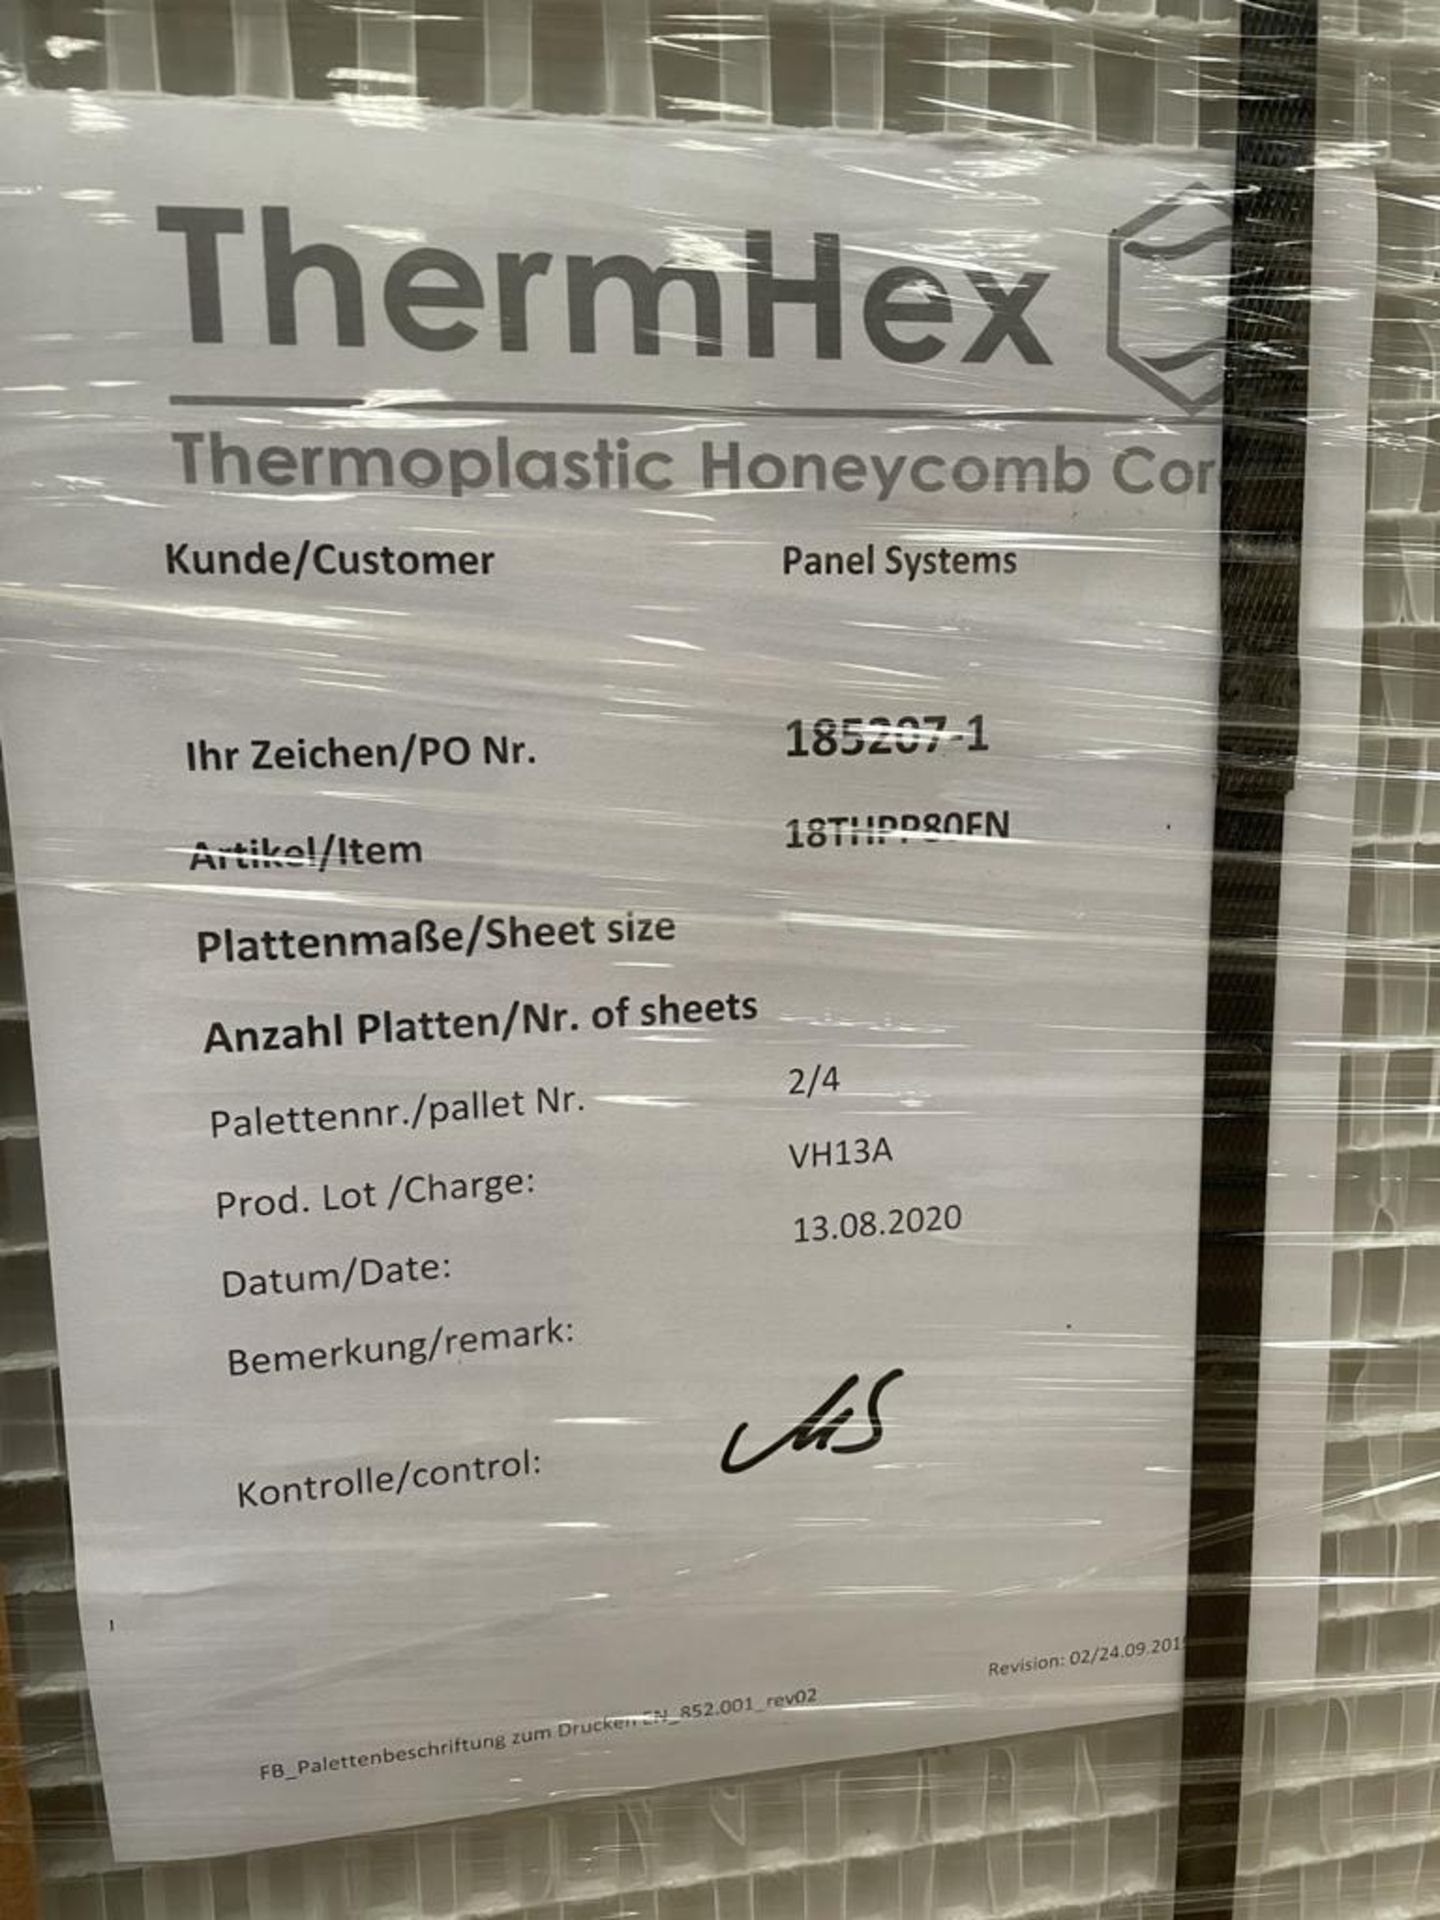 50 x ThermHex Thermoplastic Honeycomb Core Panels - Size 2630 x 1210 x 18mm - New Stock - - Image 2 of 8